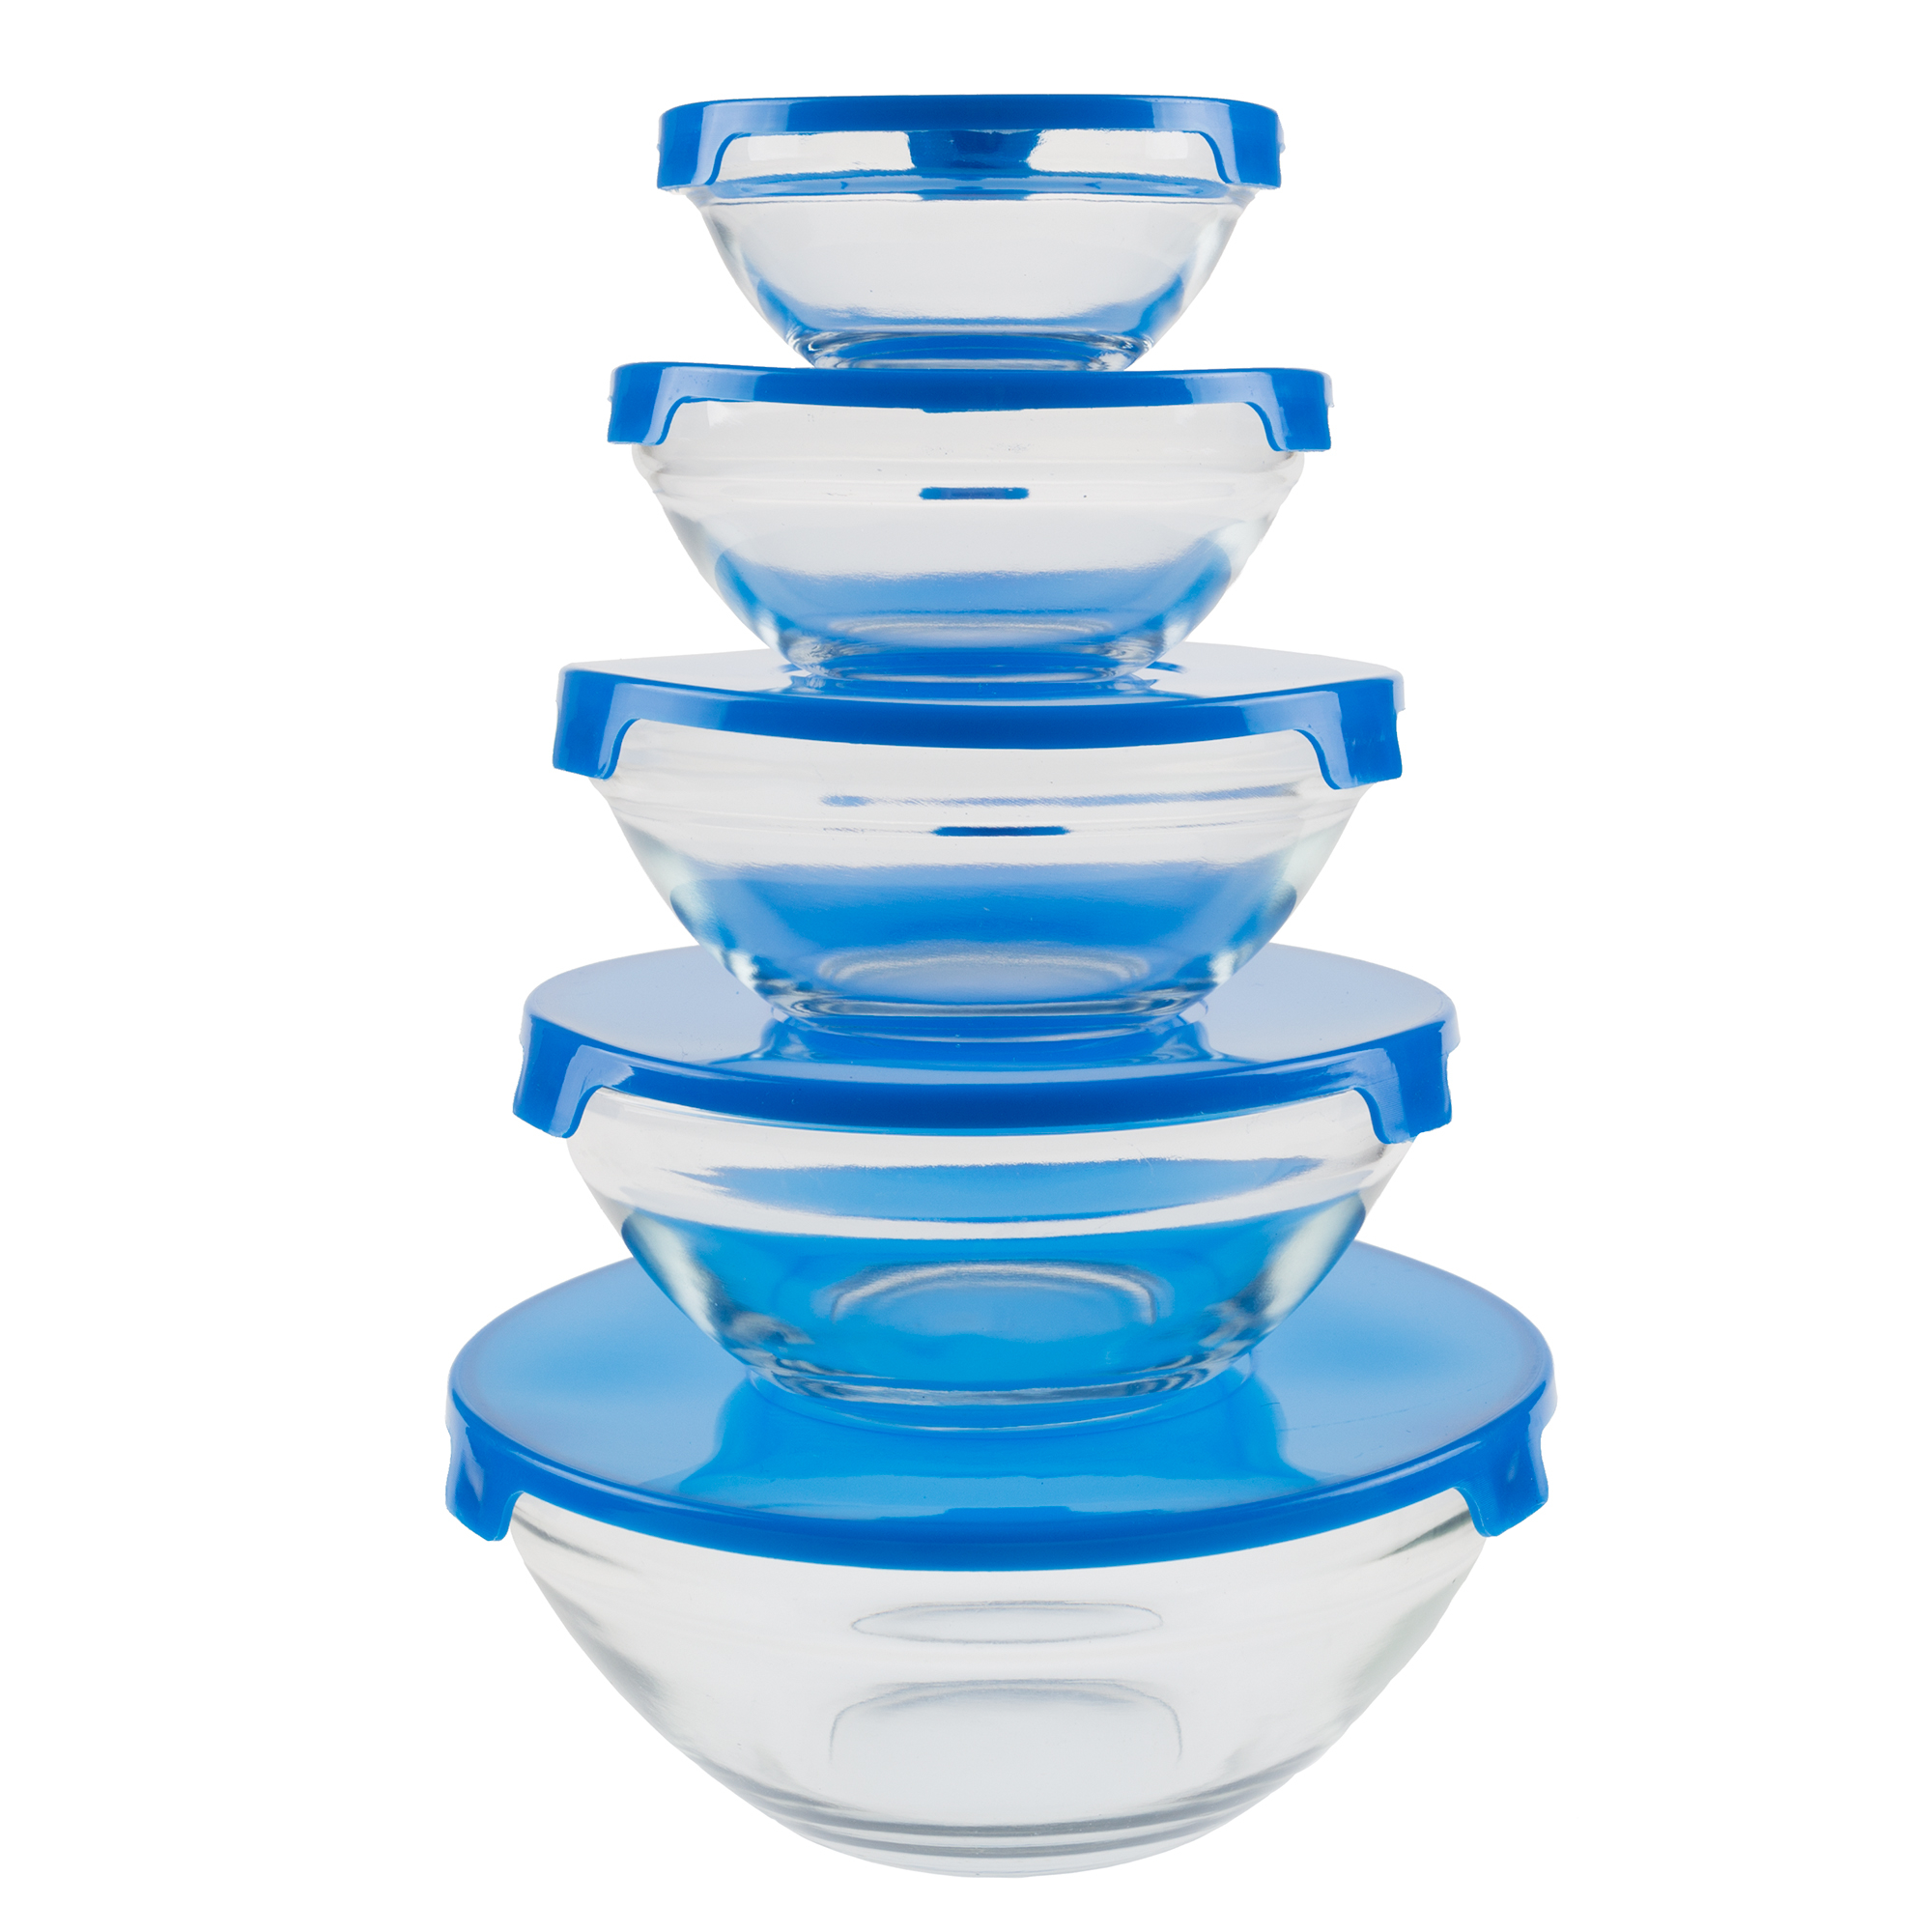 Glass Bowl Set 10 Pieces with Blue Plastic Lids by Chef Buddy